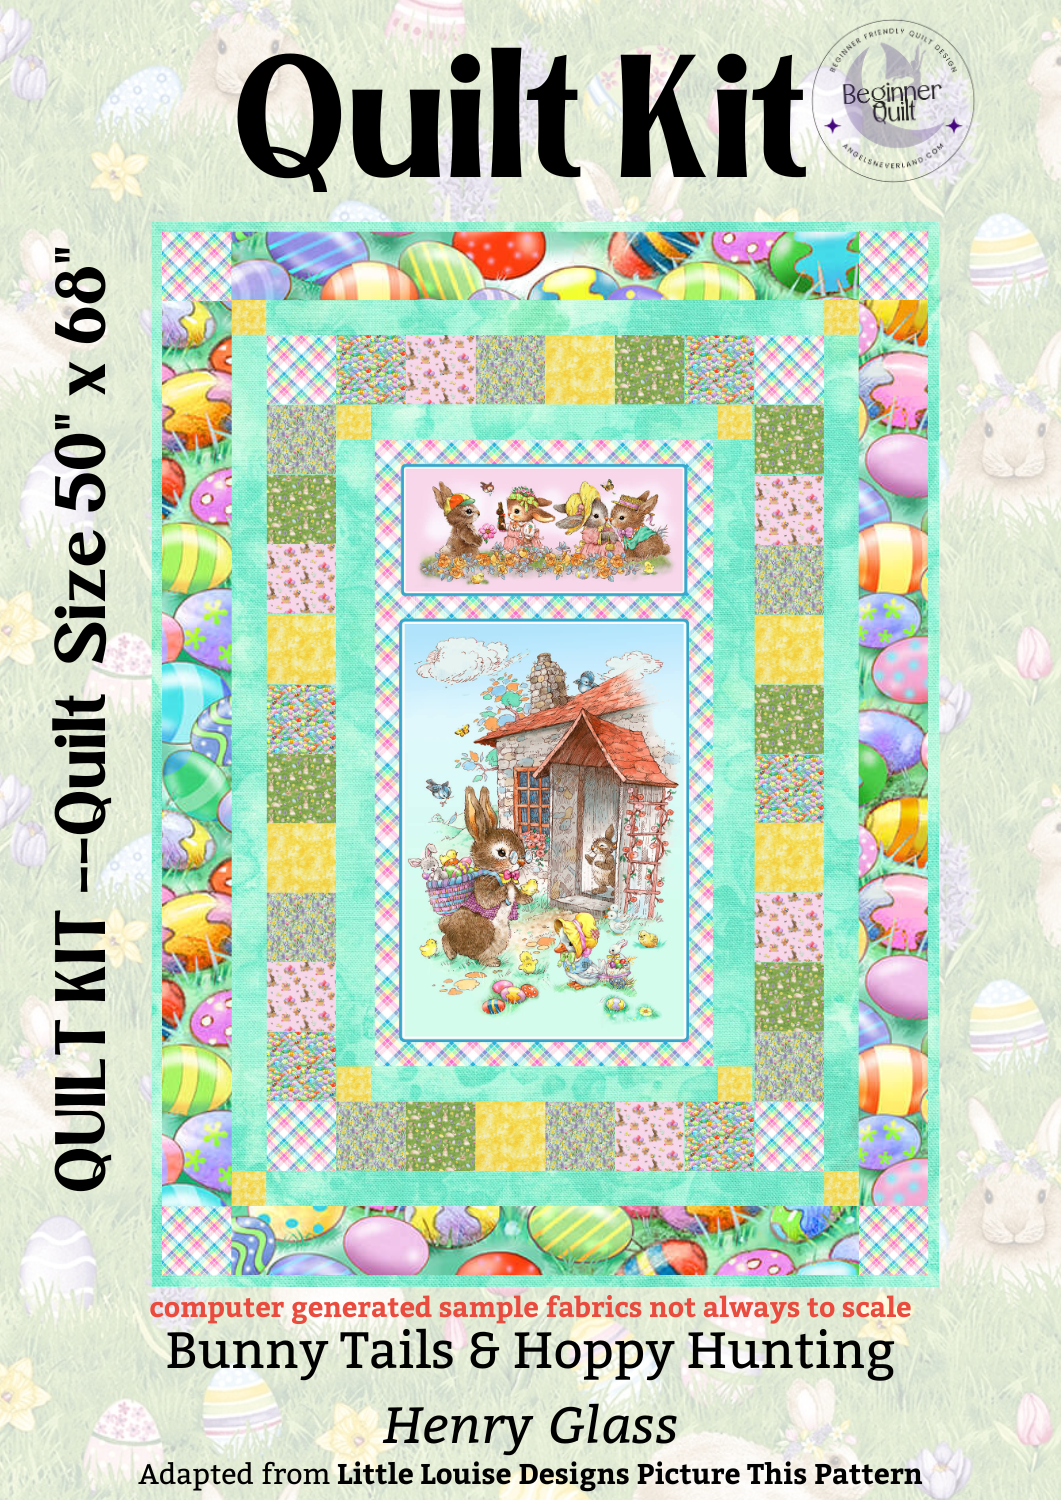 Henry Glass Quilt Kit Quilt Kit No backing Hoppy Hunting & Bunny Tails Easter Beginner Quilt Kit with Picture This Pattern